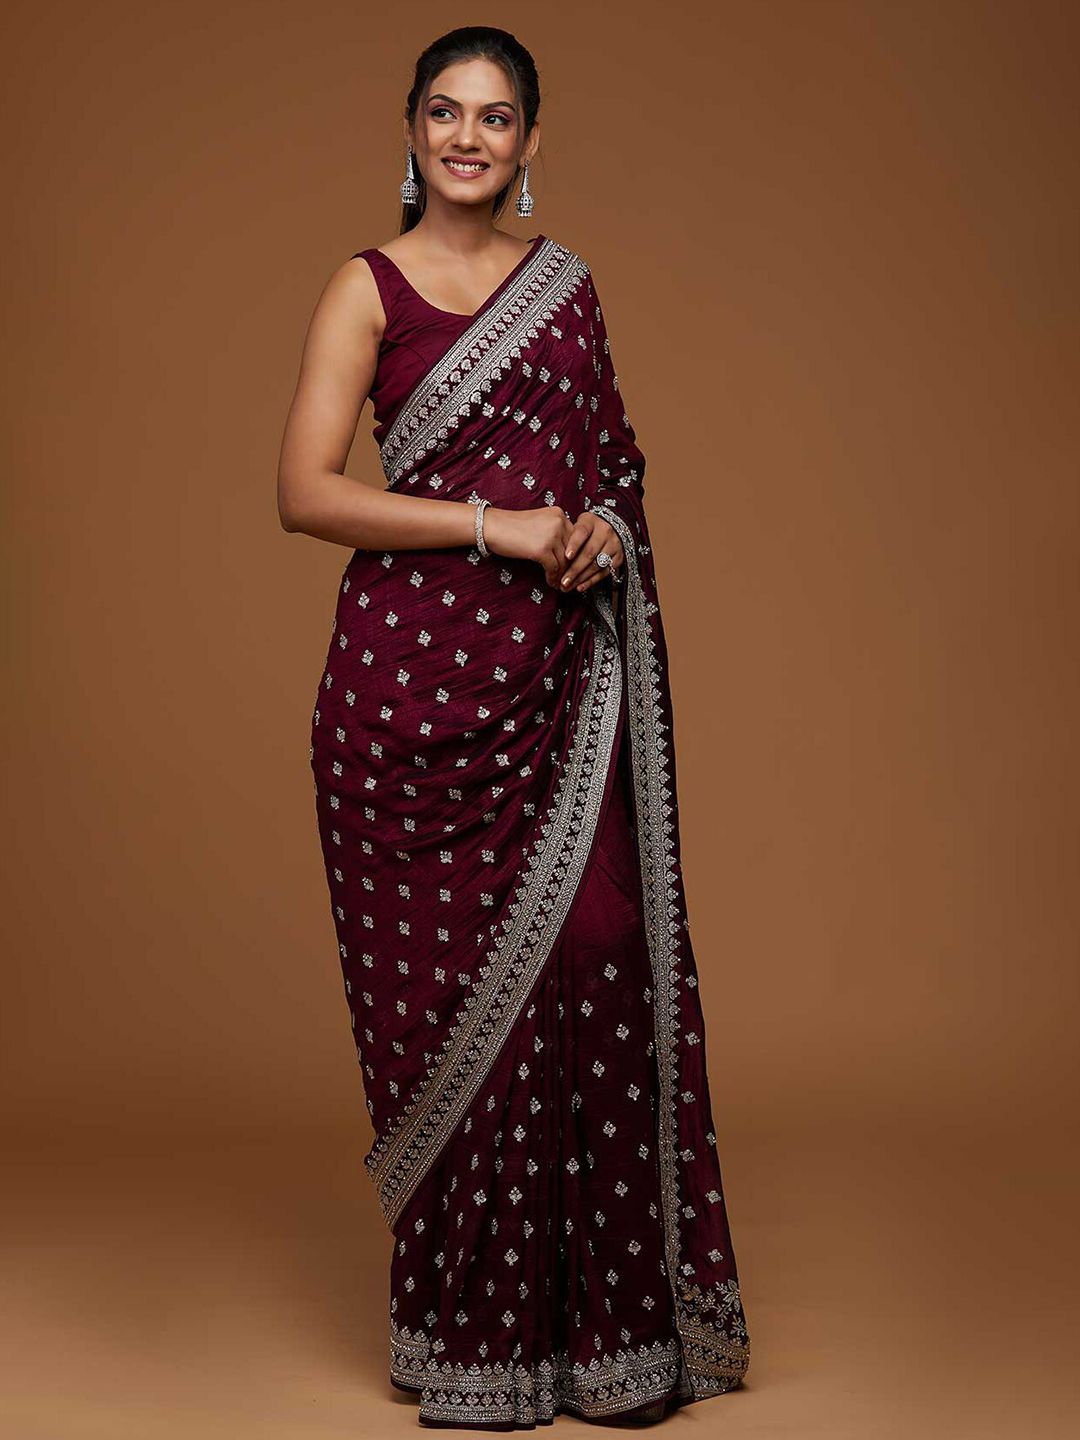 Koskii Maroon & Silver-Toned Floral Embroidered Art Silk Saree Price in India